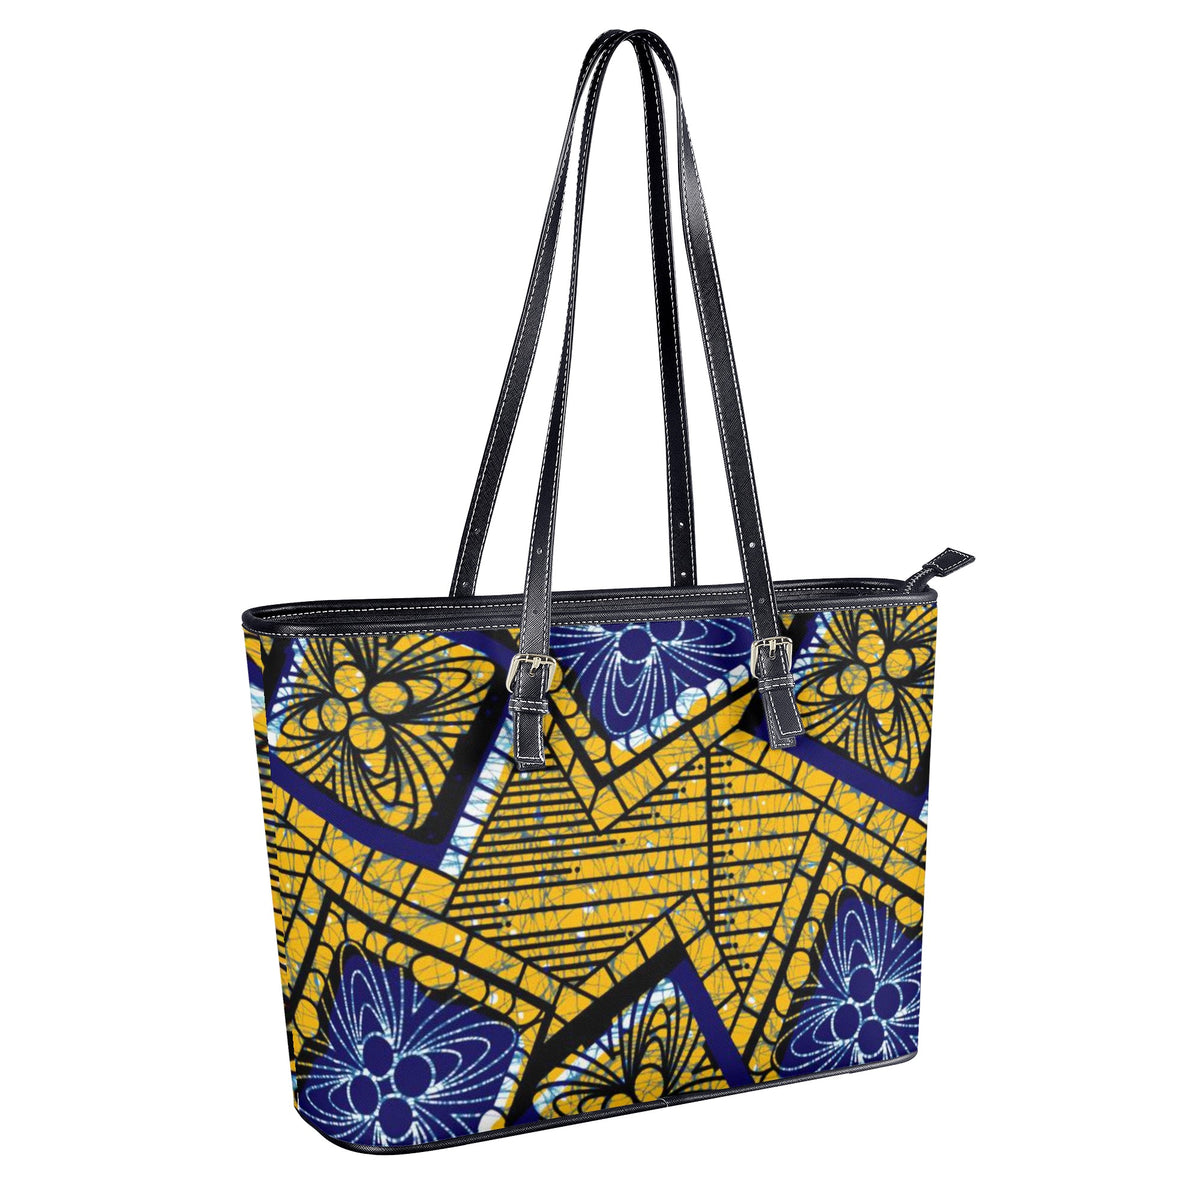 Leather Tote Bags in African Ankara Prints Popcustoms